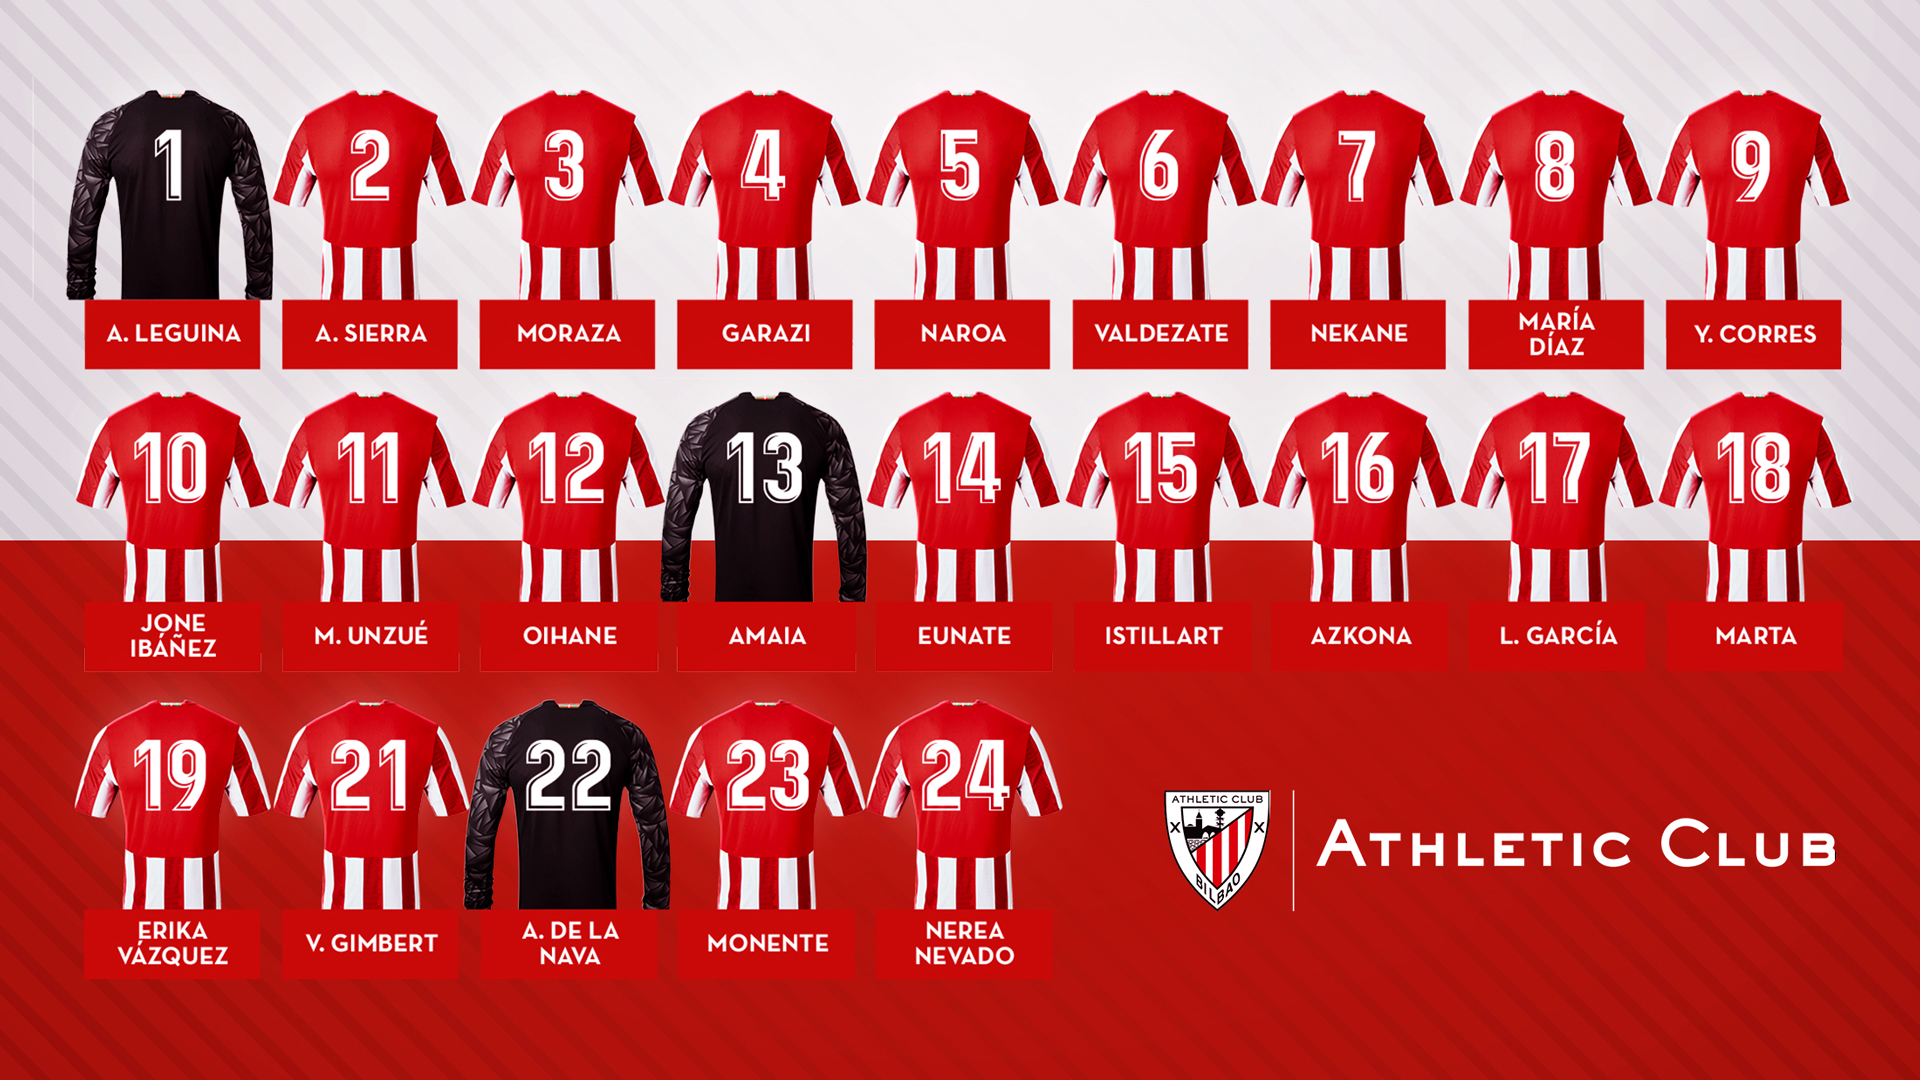 Athletic Club women 2020-21 squad numbers unveiled